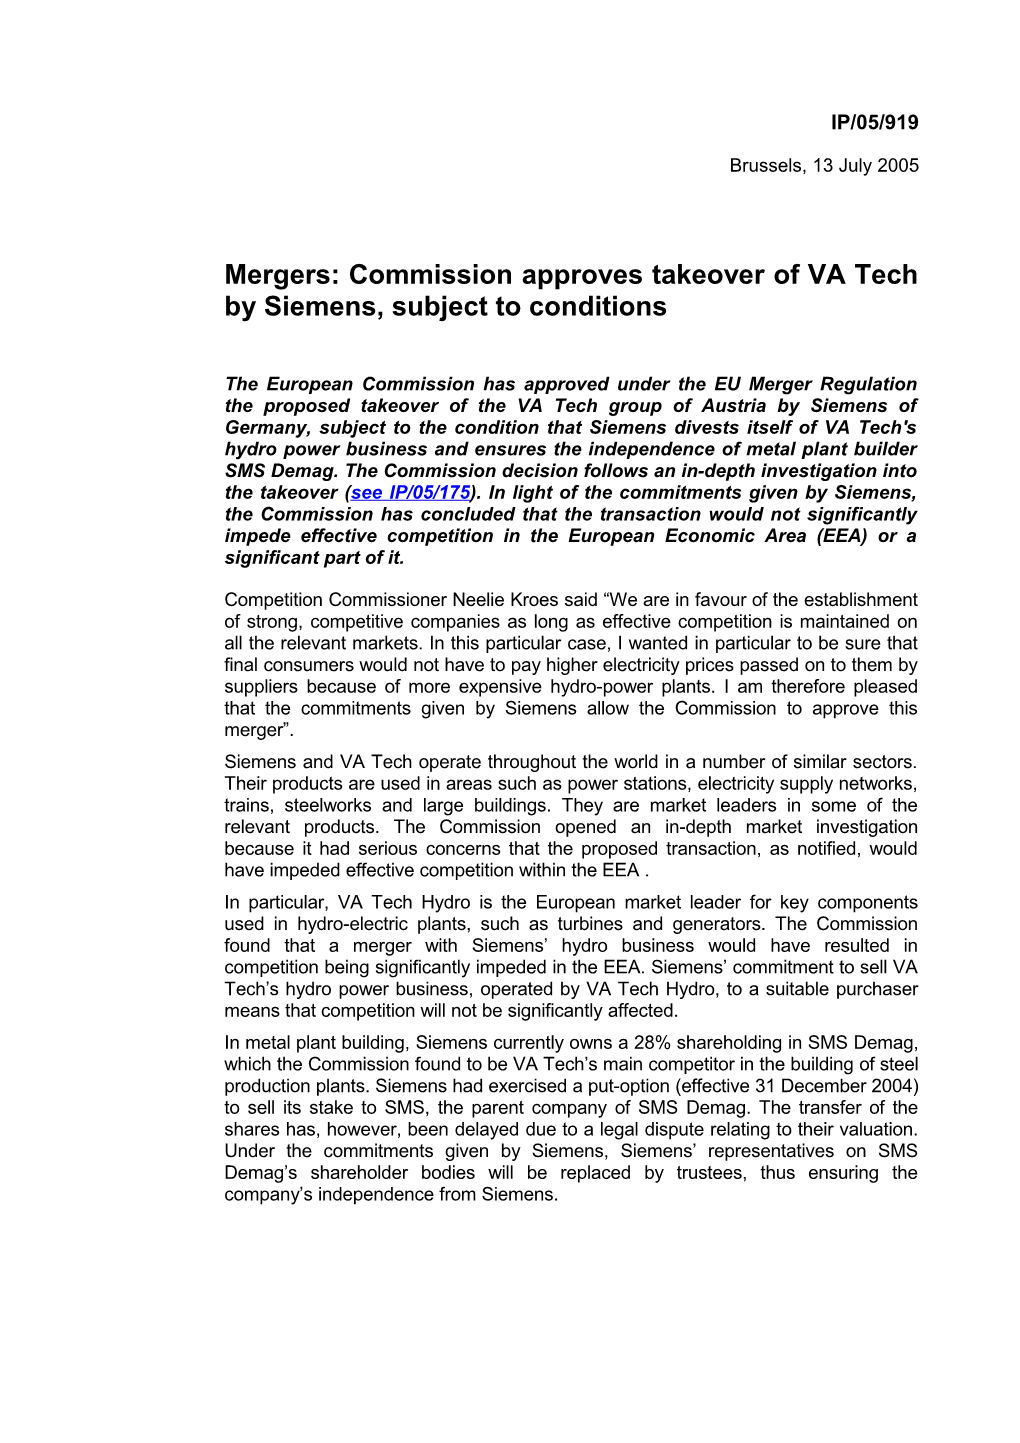 Mergers: Commission Approves Takeover of VA Techby Siemens,Subject to Conditions